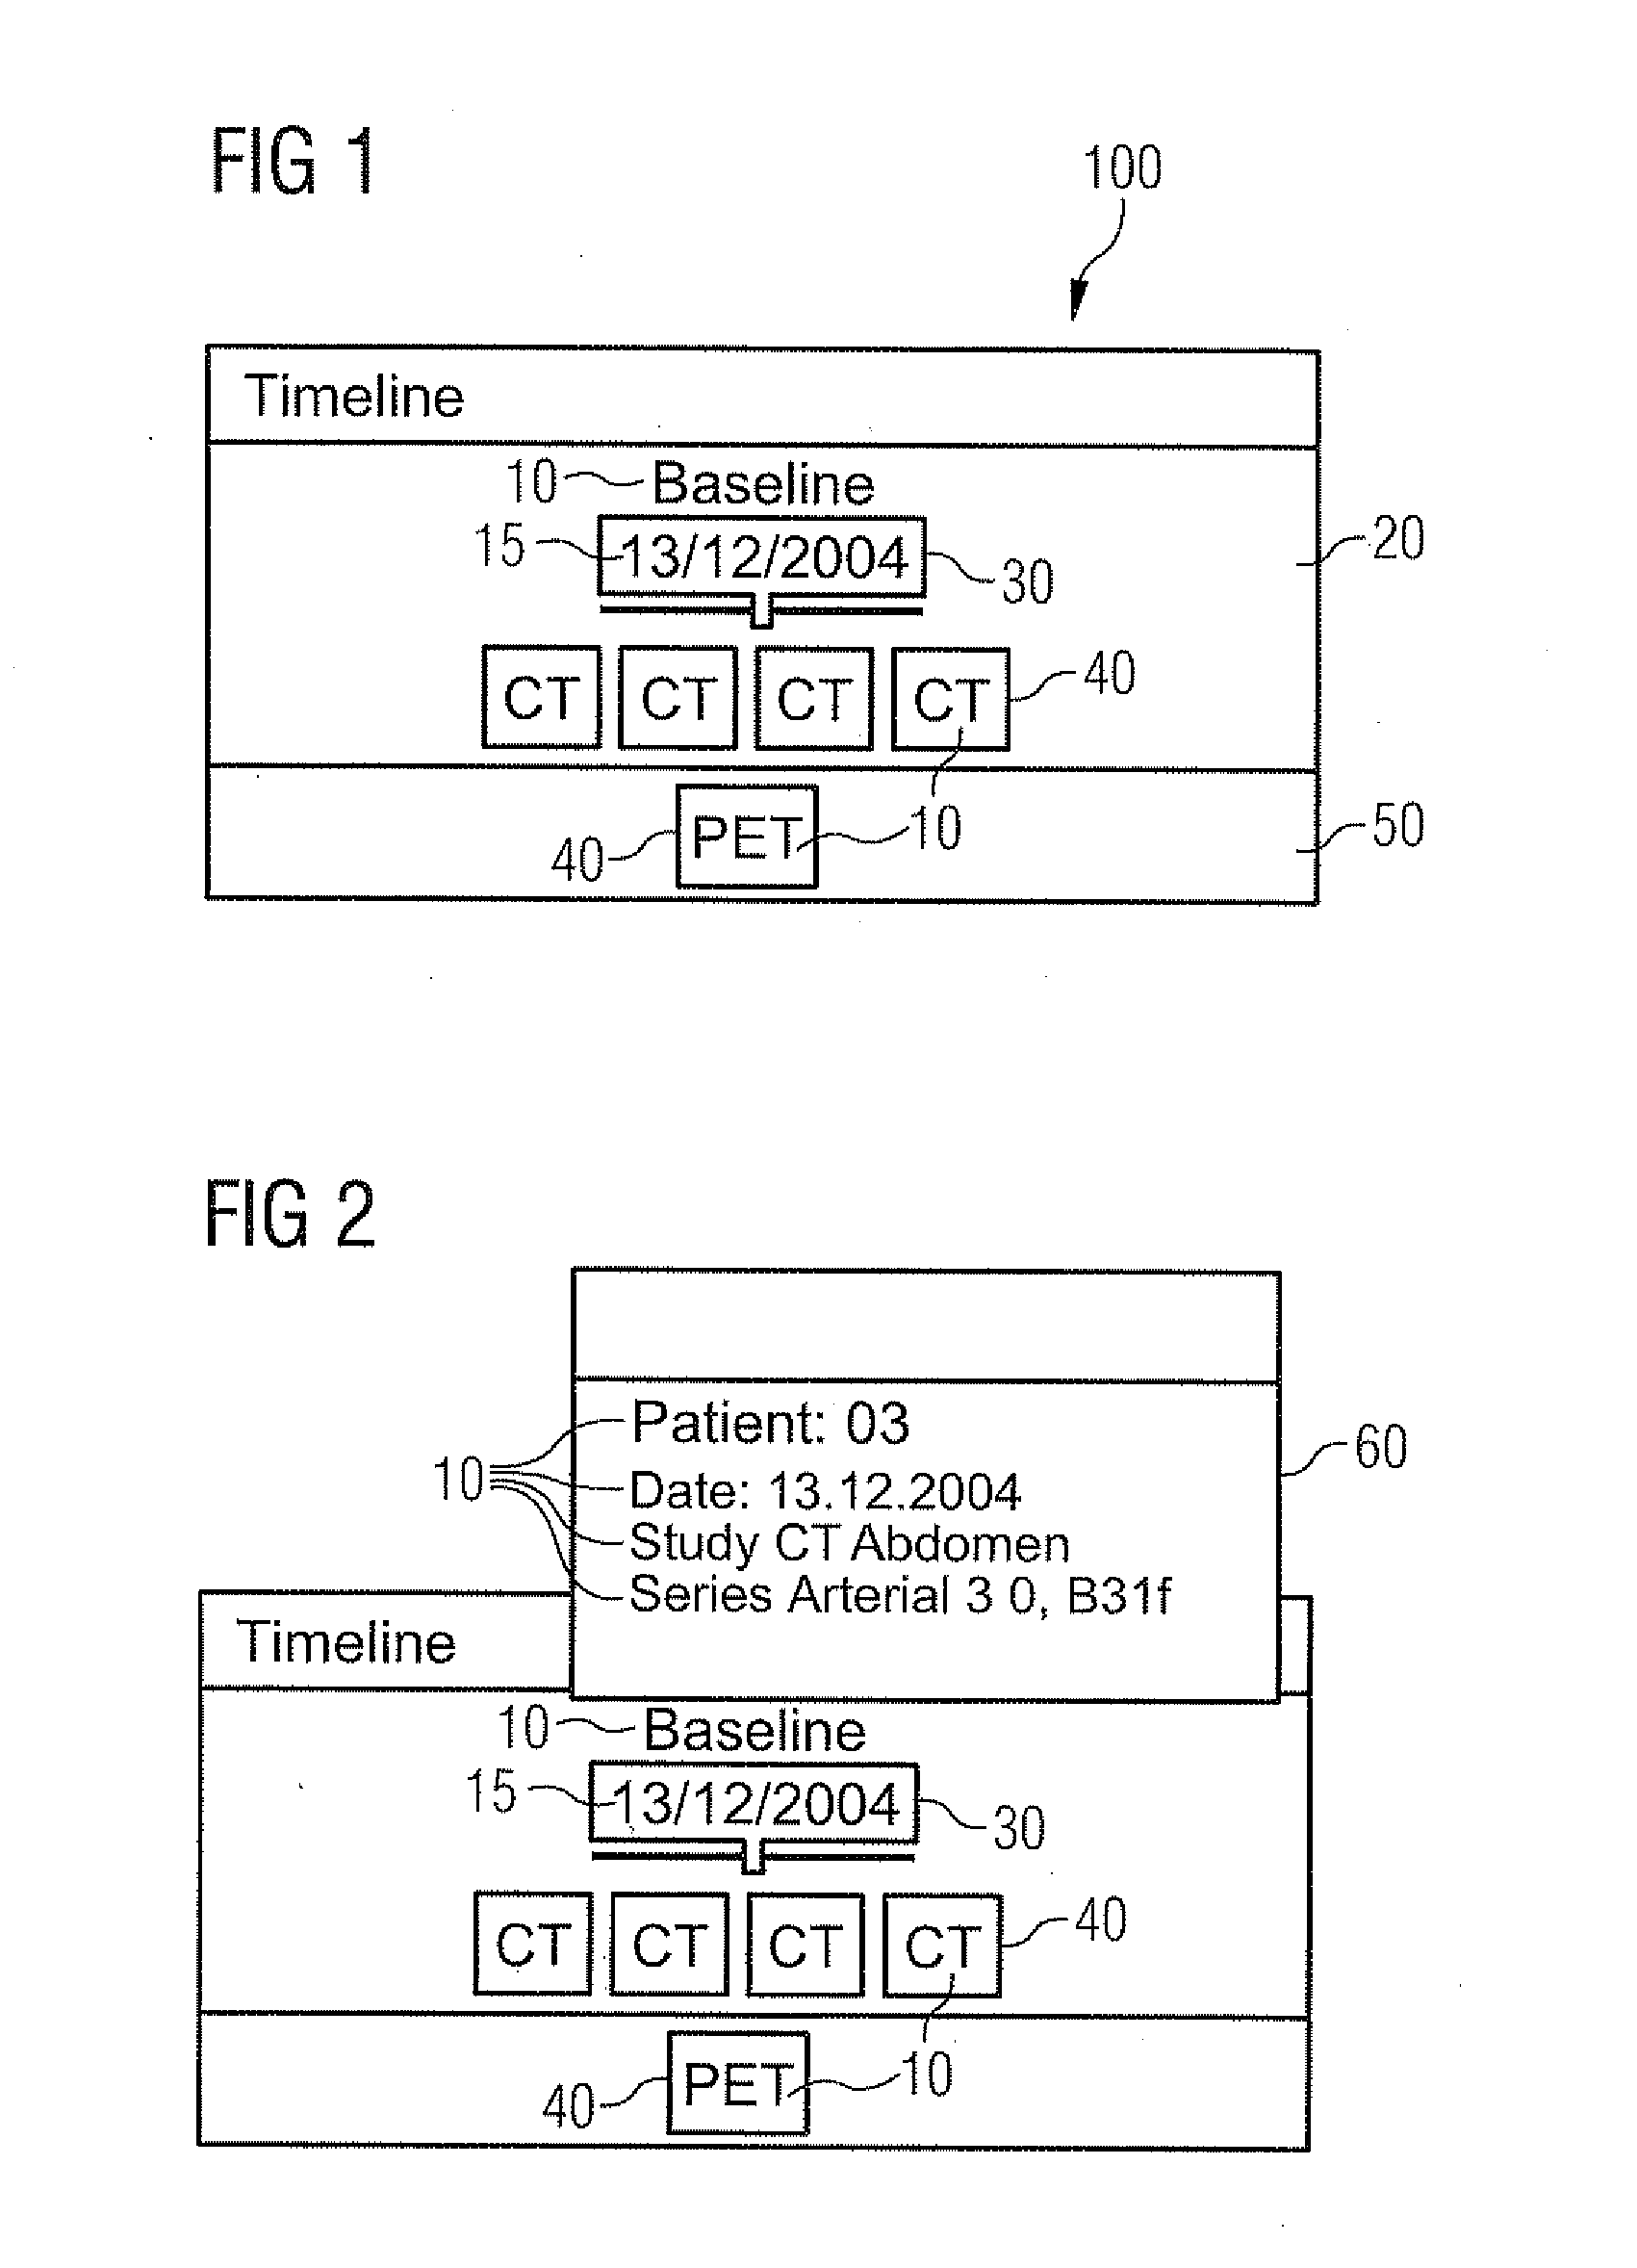 Graphical interface for the management of sequential medical data